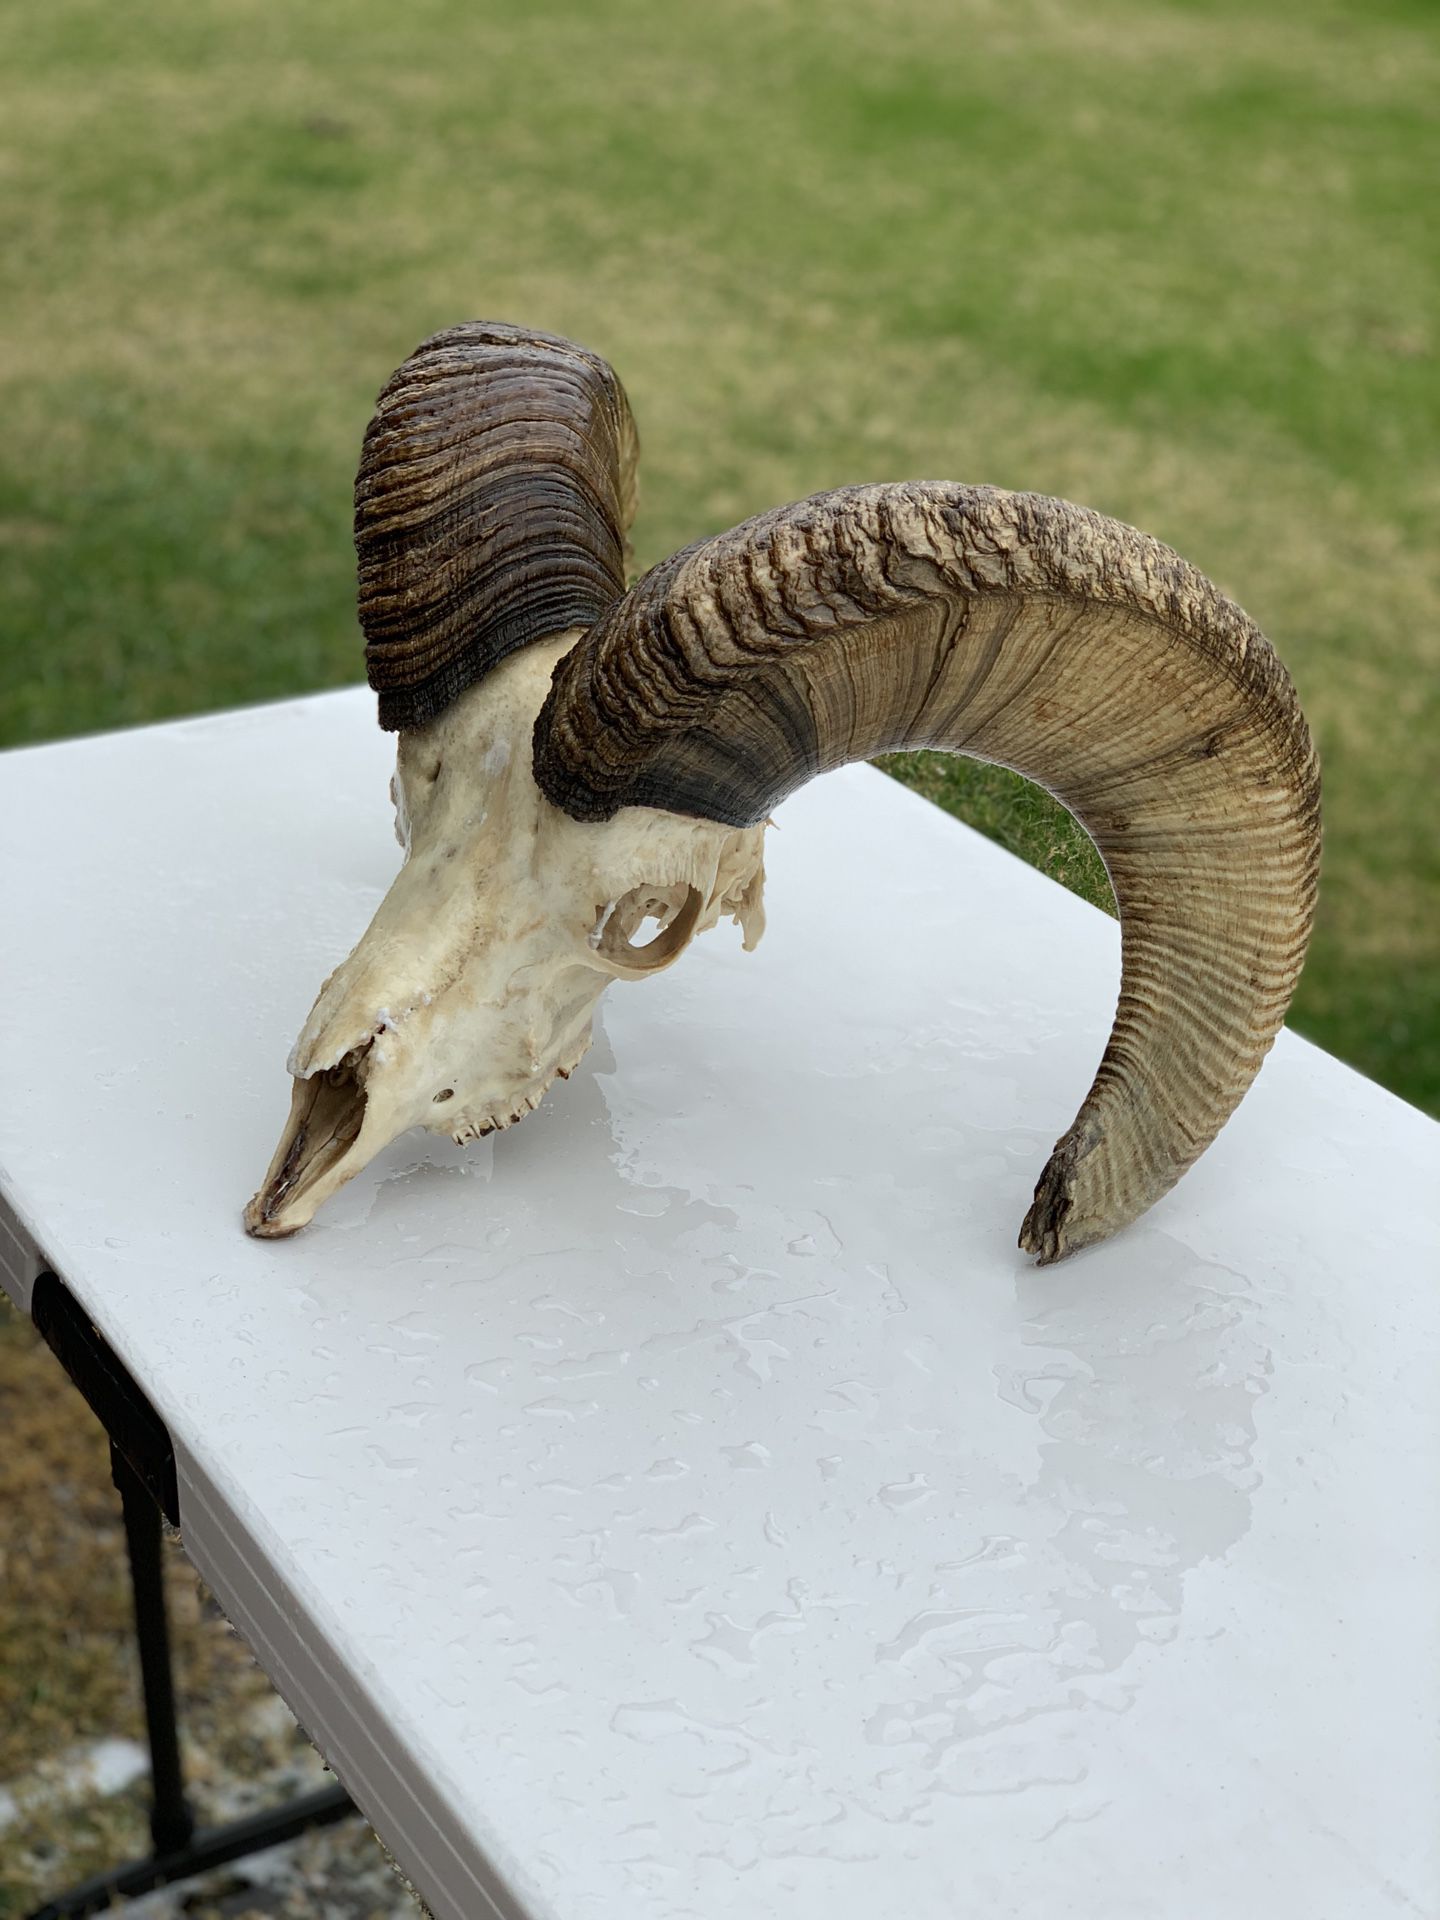 Big horn sheep skull with horns